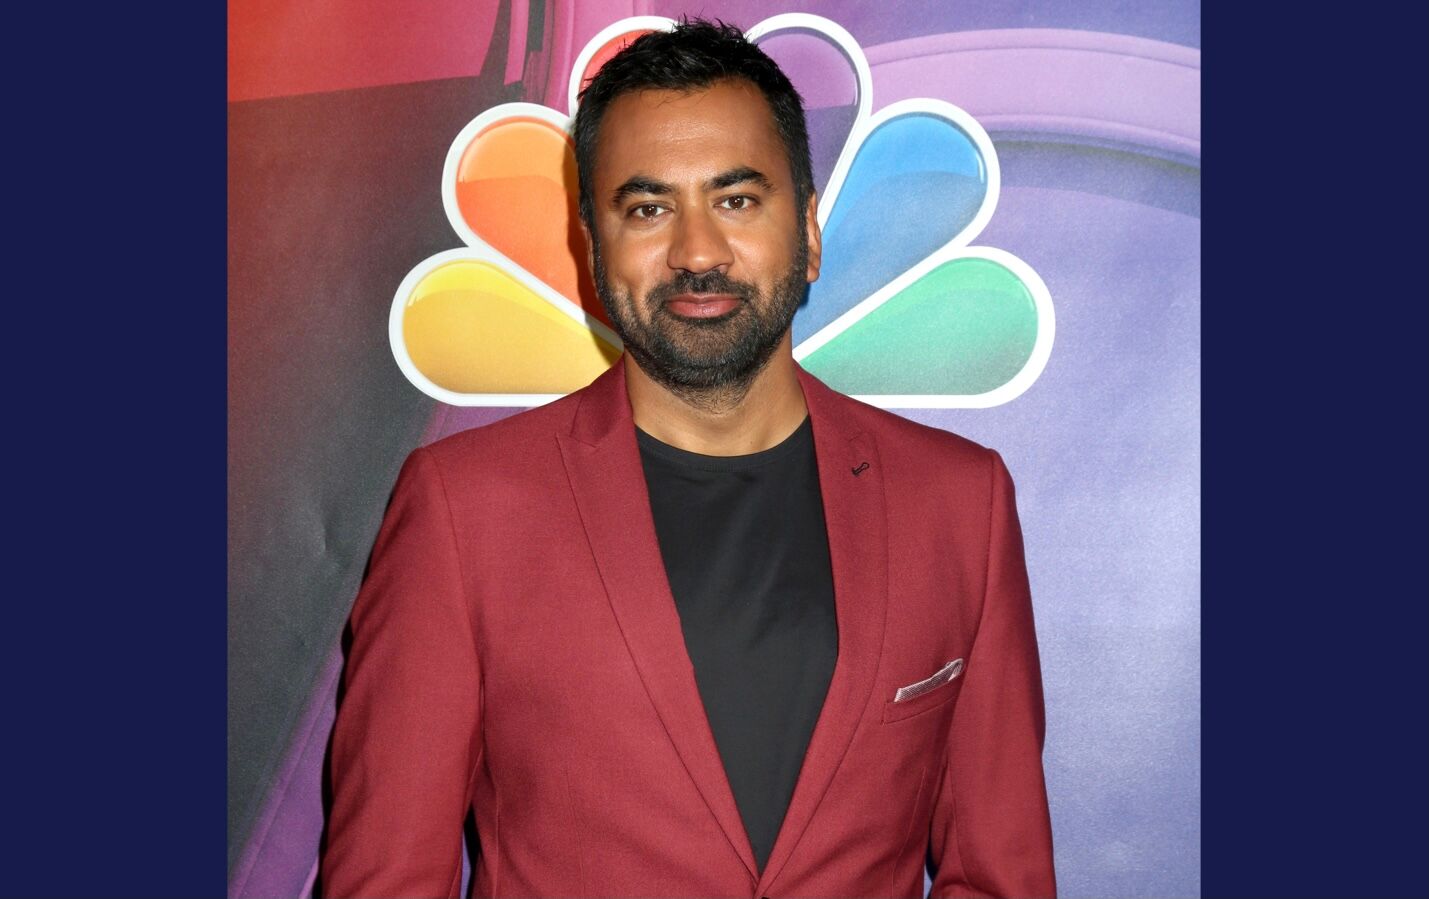 Kal Penn at the NBC TCA Summer 2019 Press Tour at the Beverly Hilton Hotel on August 8, 2019 in Beverly Hills